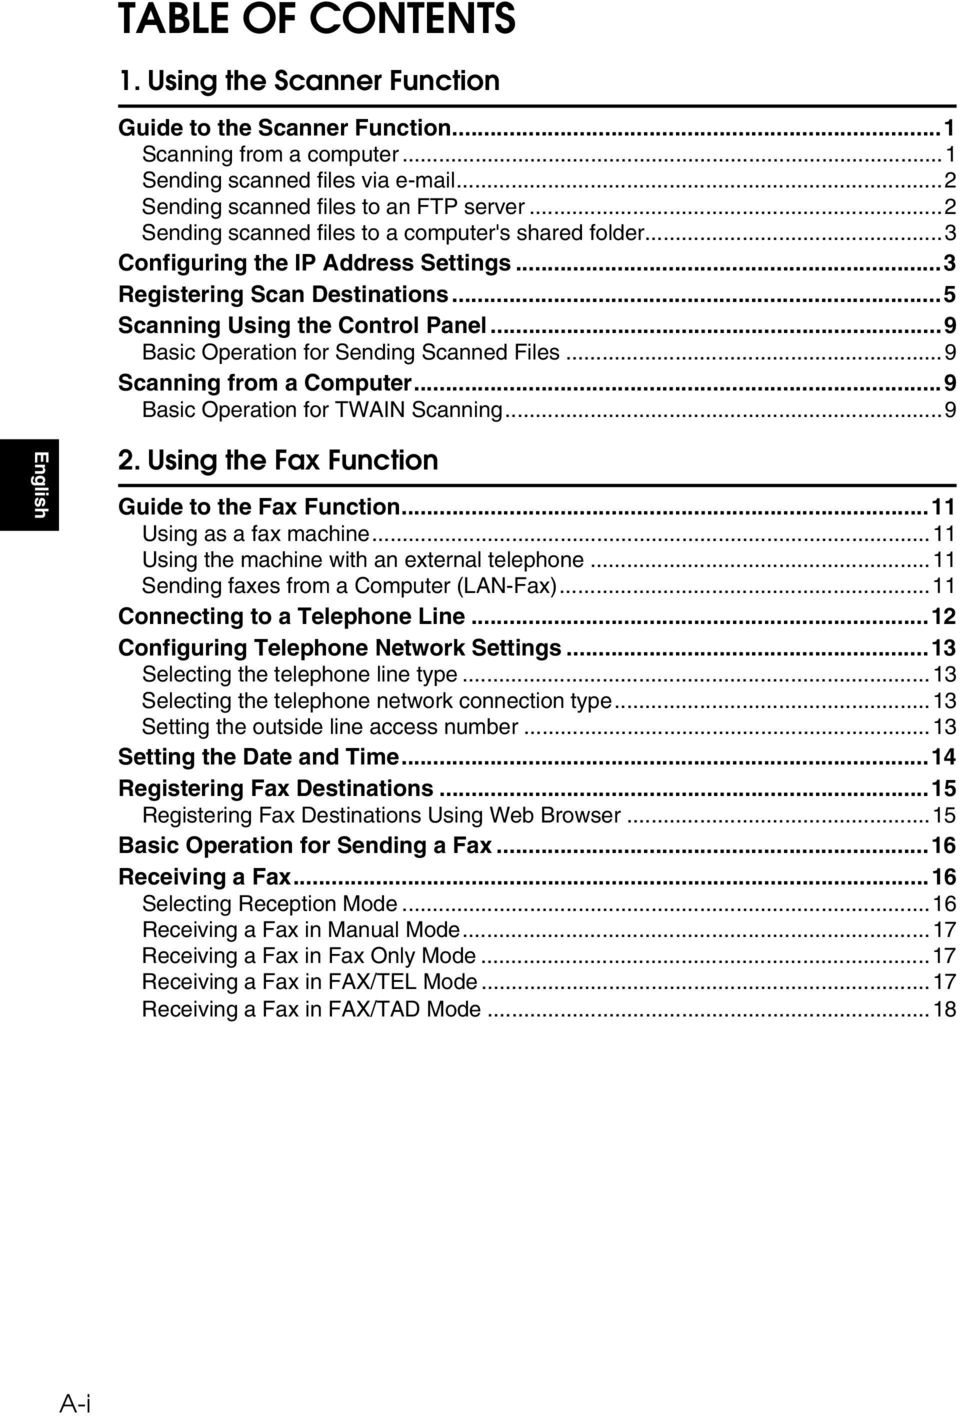 ..9 Basic Operation for Sending Scanned Files...9 Scanning from a Computer...9 Basic Operation for TWAIN Scanning...9 English 2. Using the Fax Function Guide to the Fax Function.